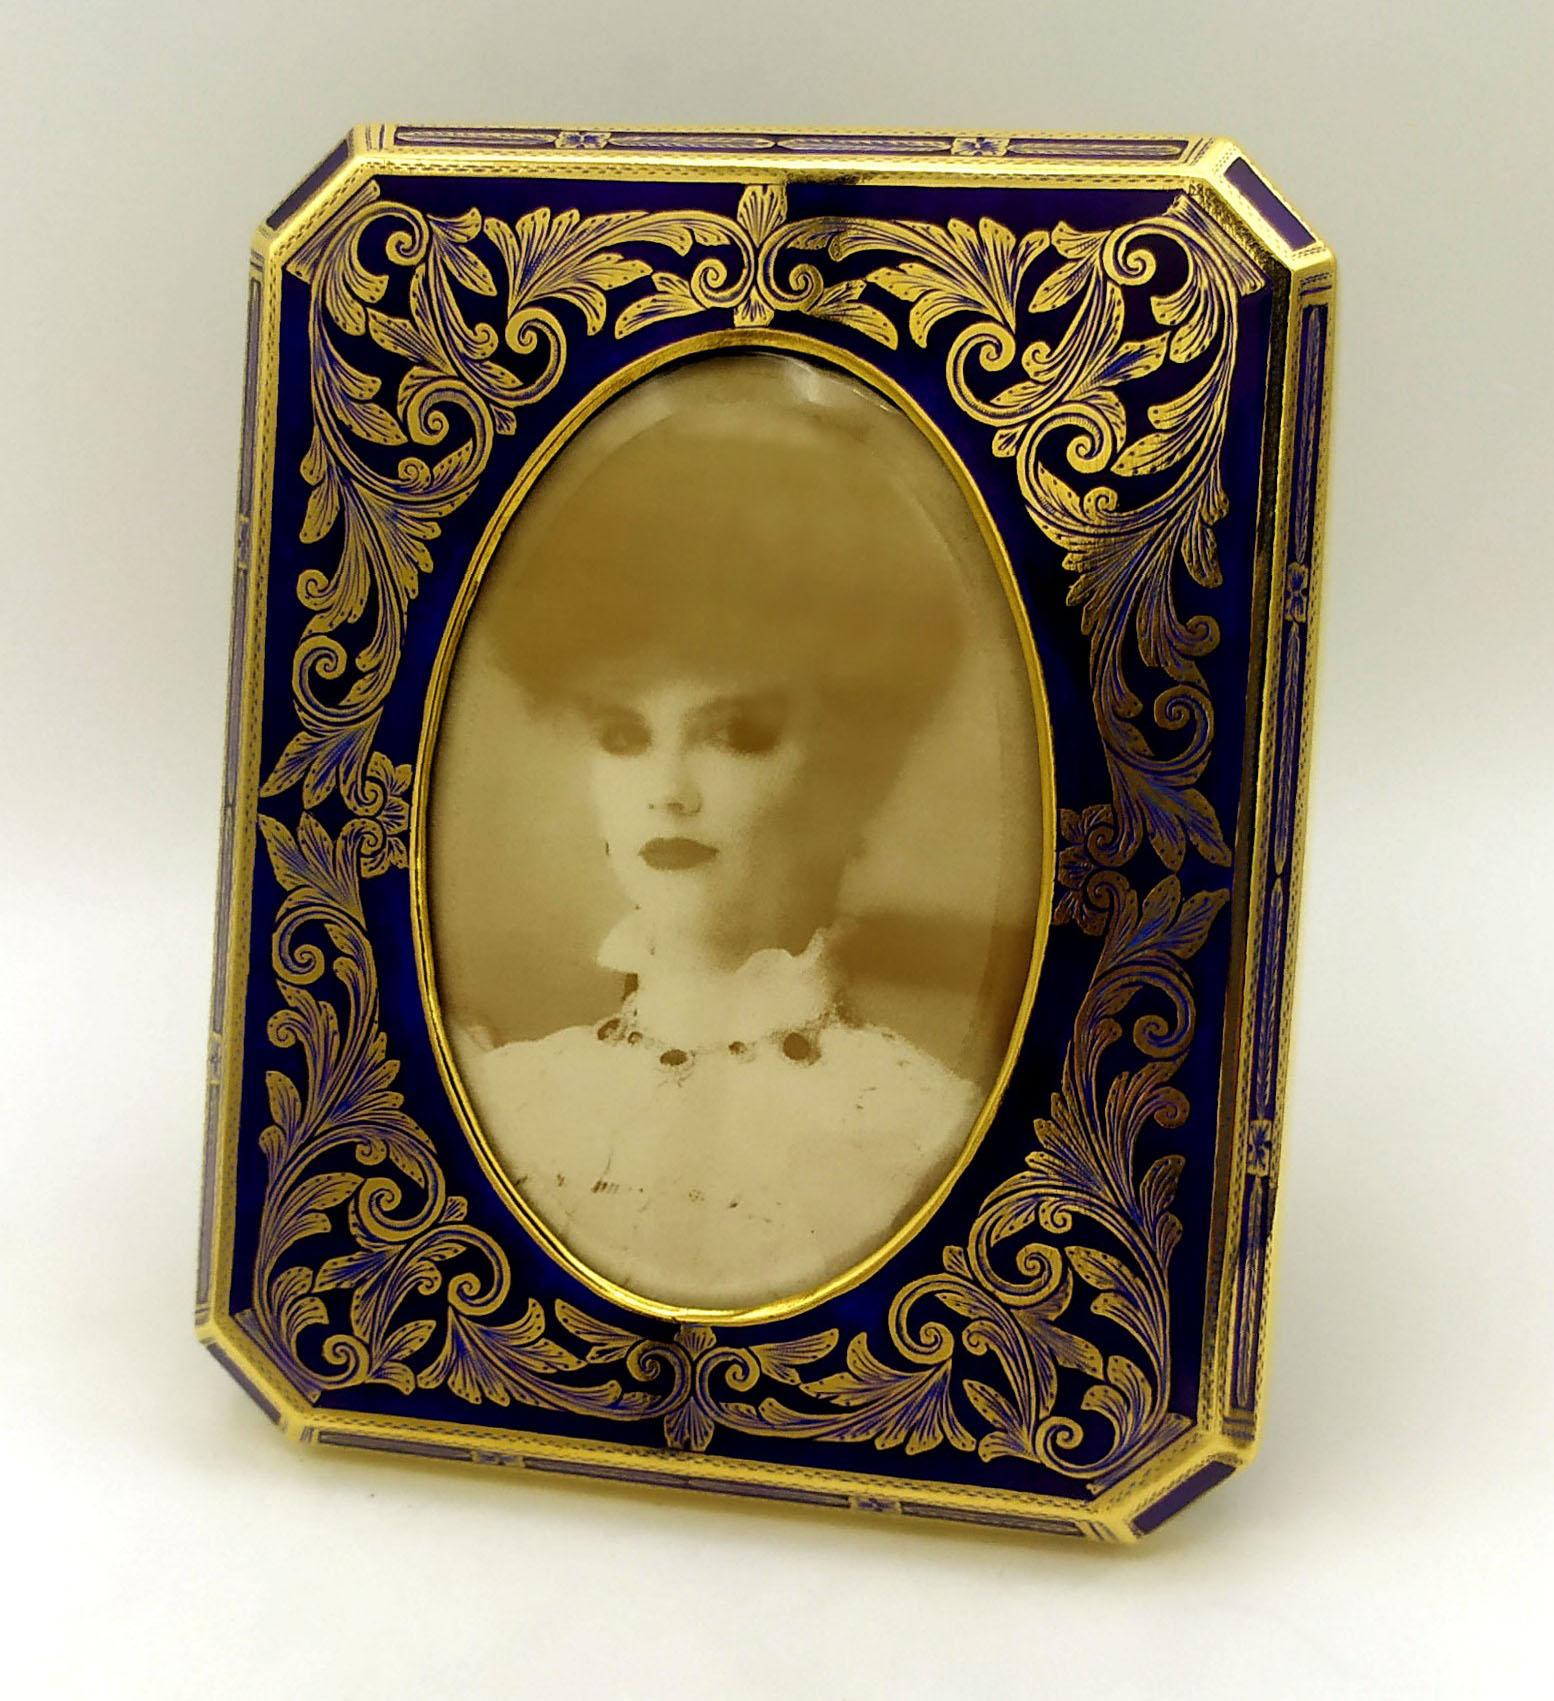 Octagonal notched photo frame in 925/1000 sterling silver gold plated with fine fire-enamelled baroque style engraving. External dimensions cm. 14.2 x 17.8, internal oval cm. 8 x 12.3. Weight gr. 356. Designed by Franco Salimbeni in 1972 and